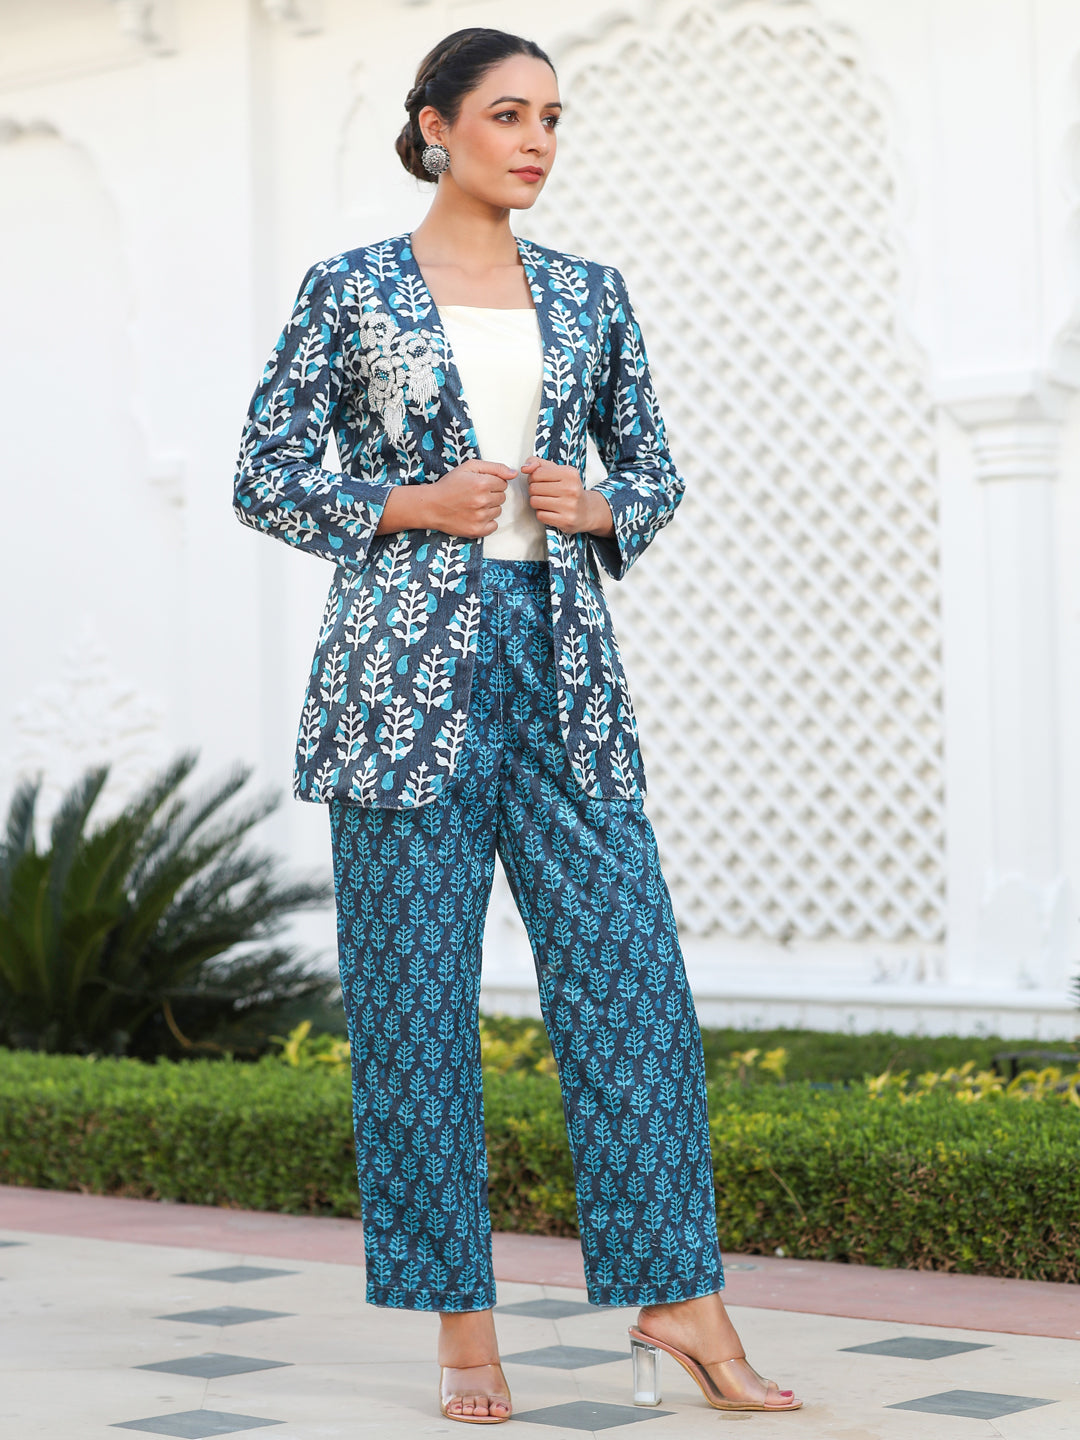 Embroidered Blue Printed Velvet Jacket With Cream Crop Top And Printed Velvet Pants